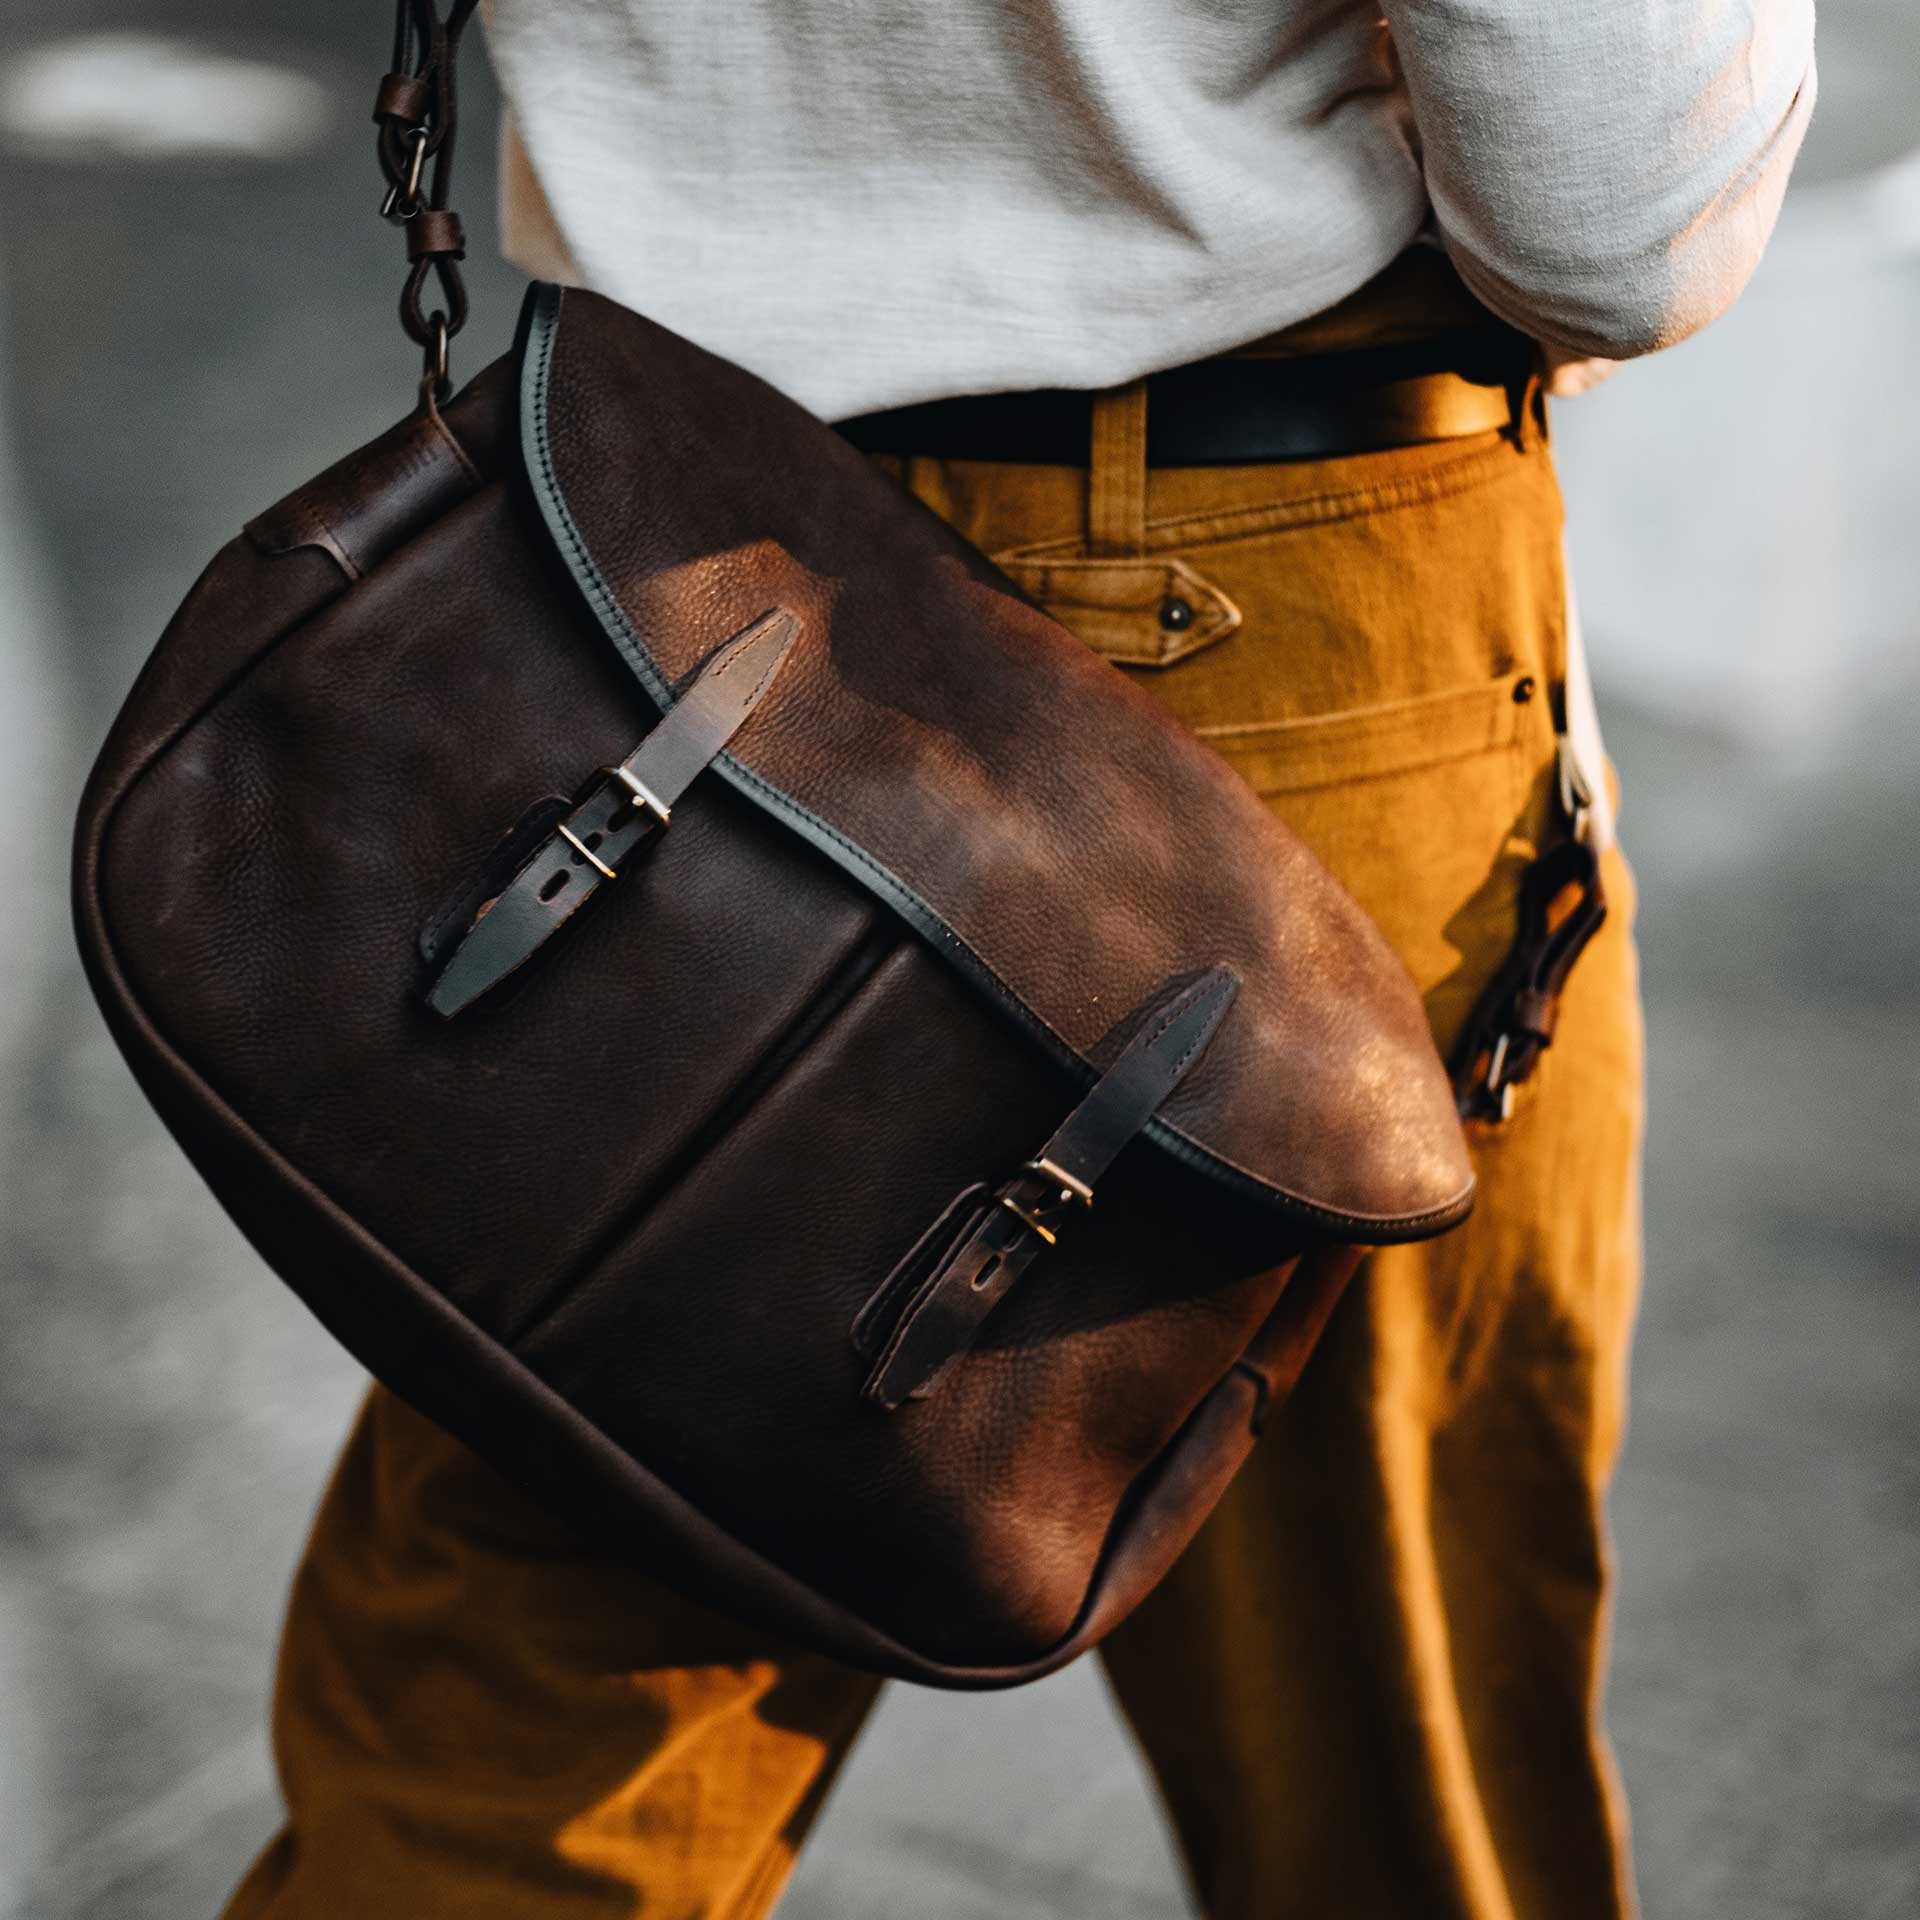 Fisherman's Musette M - Coffee / Waxed Leather (image n°3)